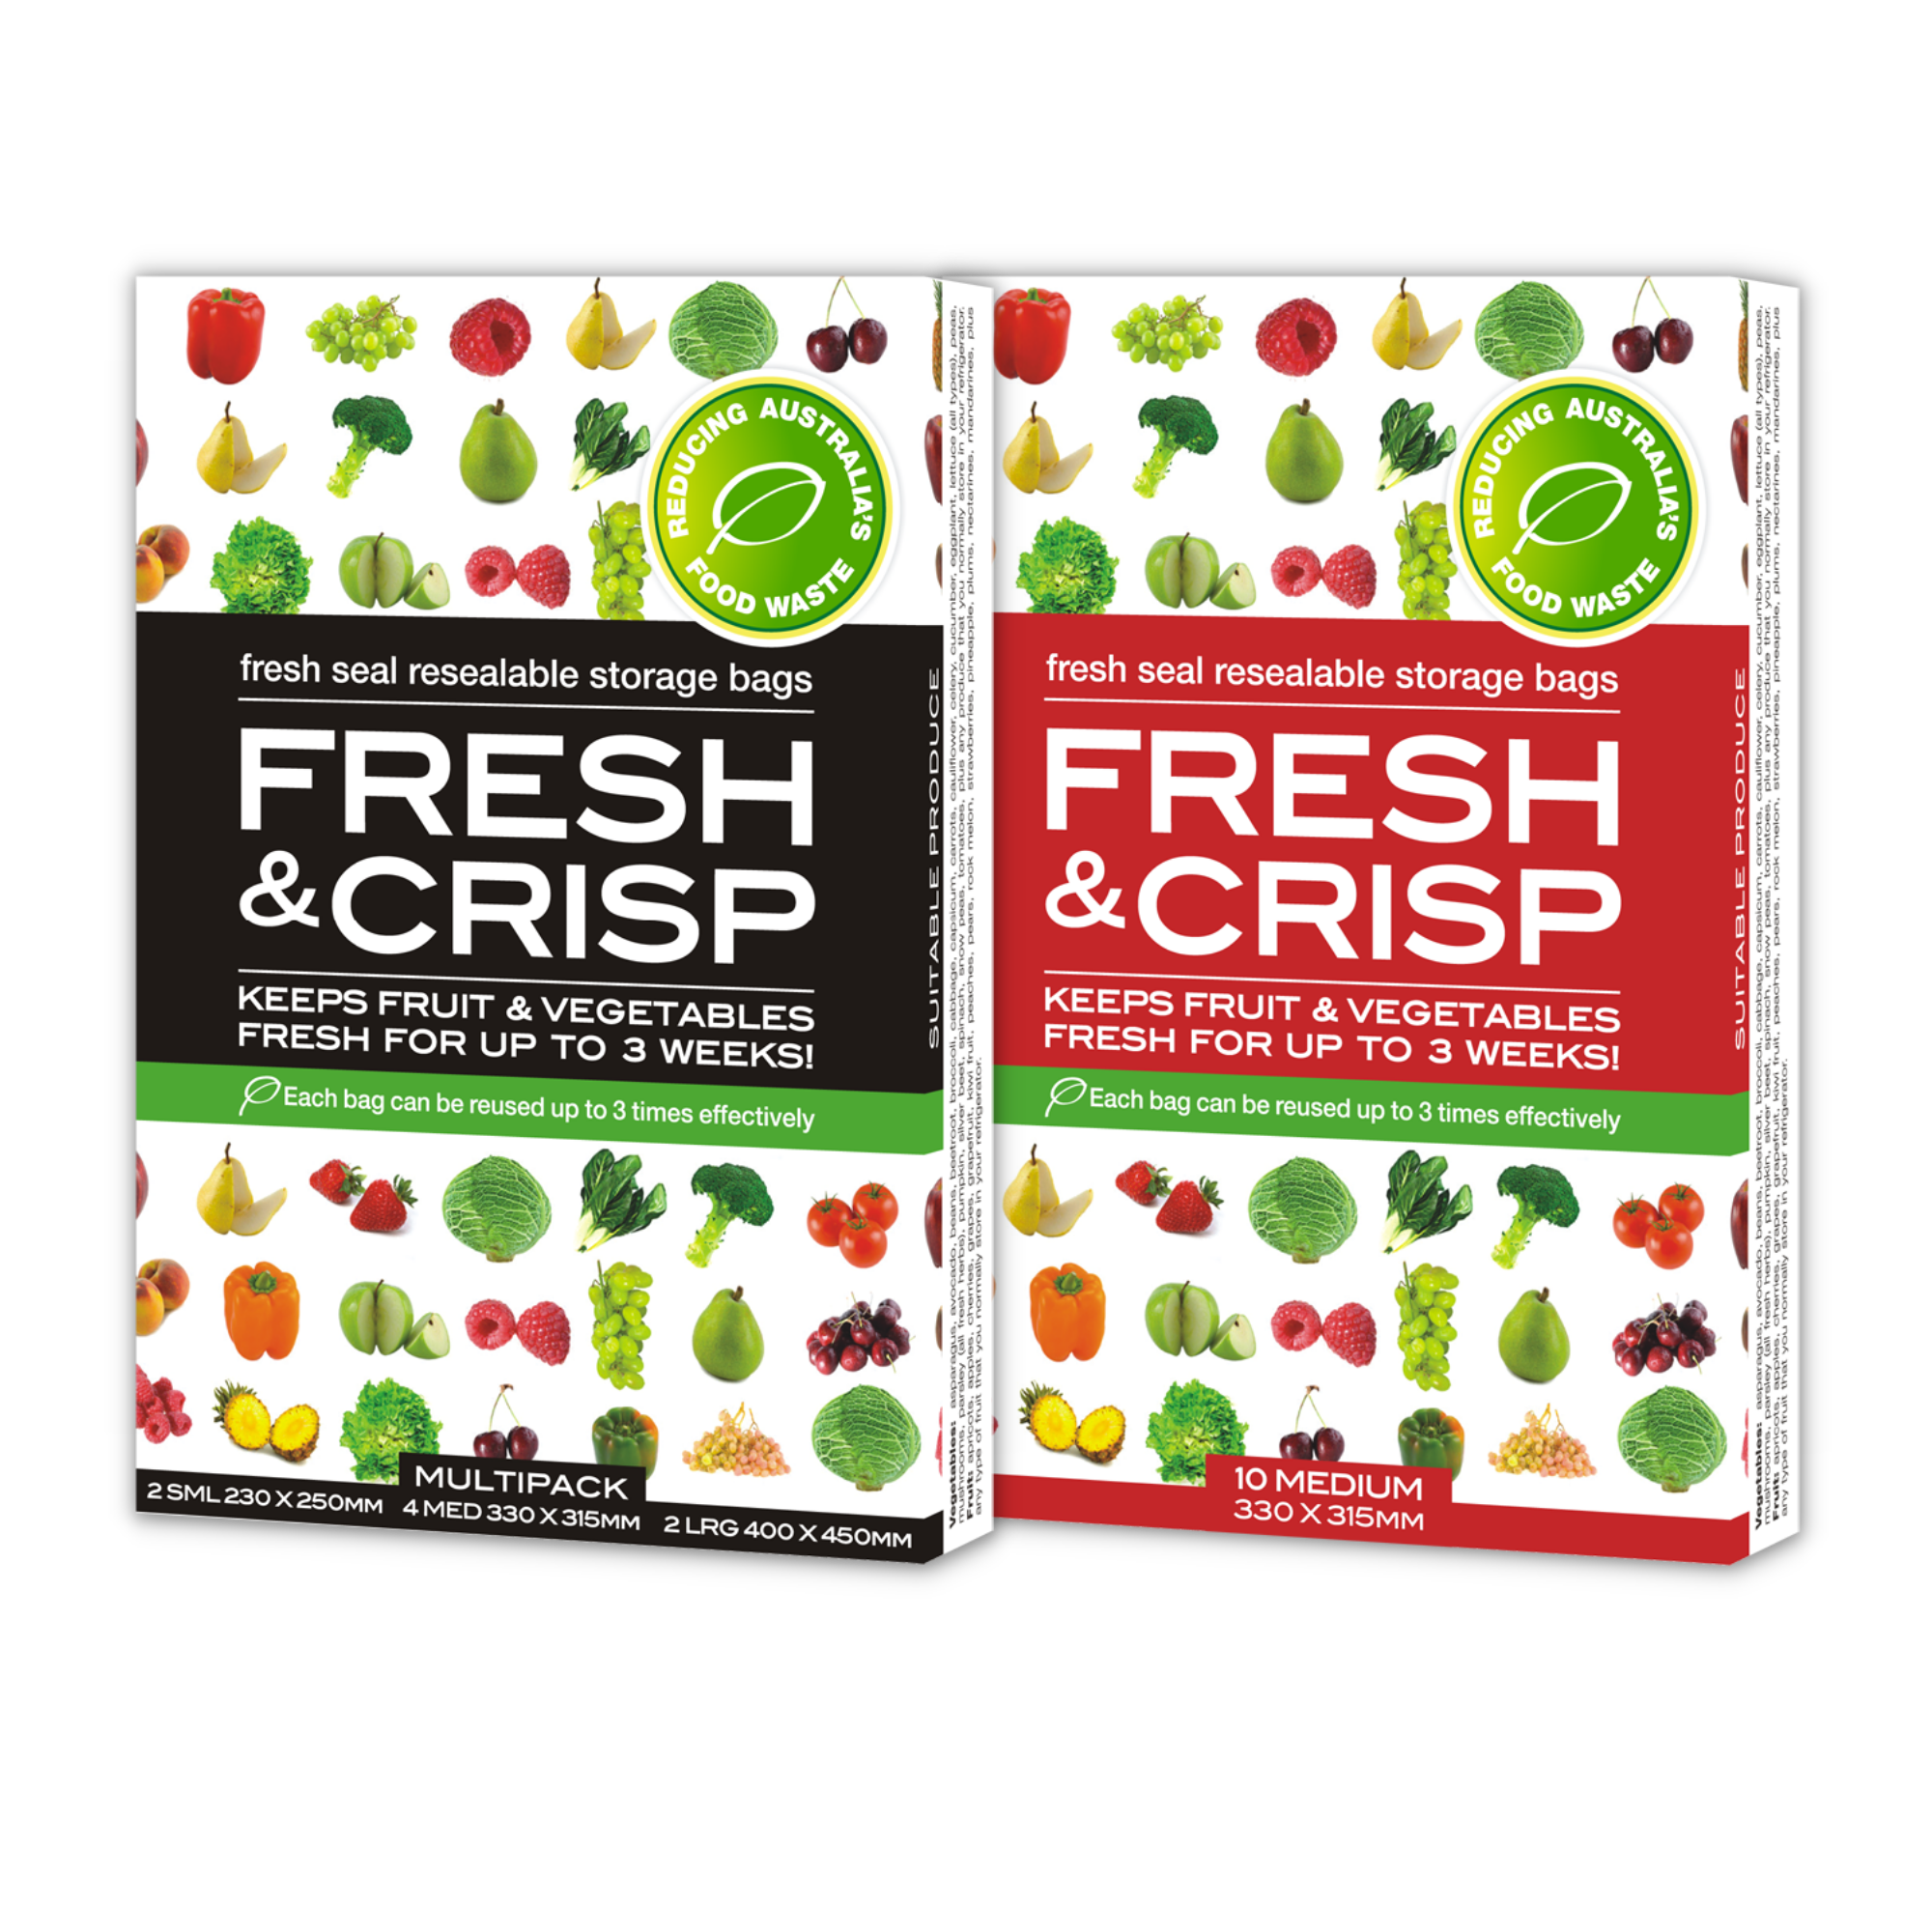 Extending the life of fruit and veggies is easy with Fresh & Crisp. The fruit and veggie storage bags are great for slowing the deterioration of fruit and veggies.